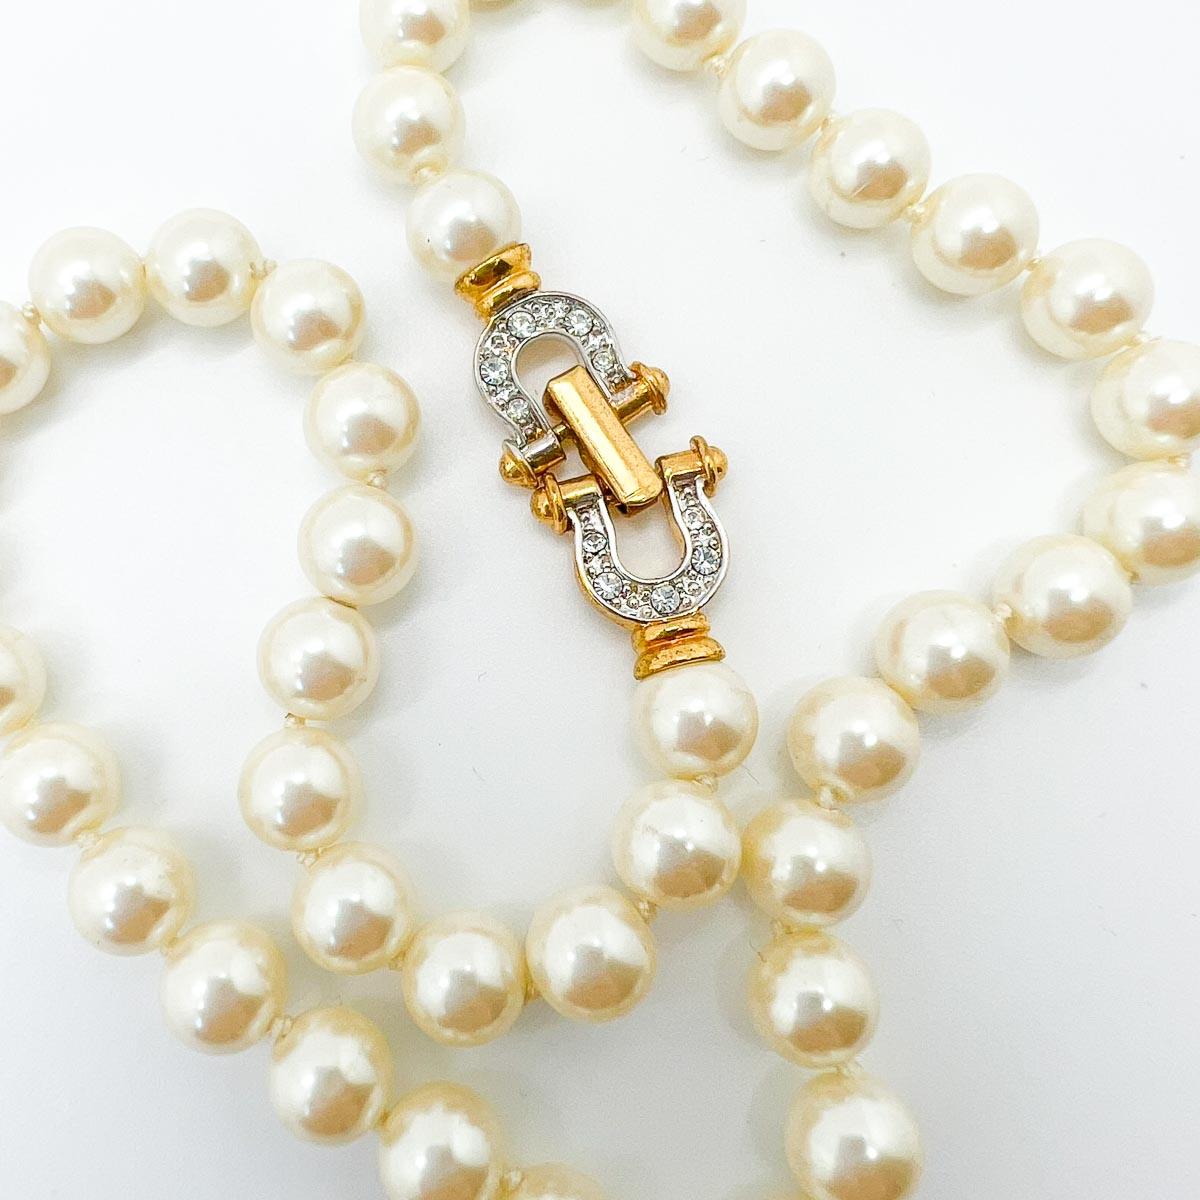 A demure and timeless Vintage Pearl Horseshoe Necklace. Perfect pearls paired with a horseshoe inspired crystal clasp makes this one a perfect jewel box classic or delightful gift.
An unsigned beauty. A rare treasure. Just because a jewel doesn’t